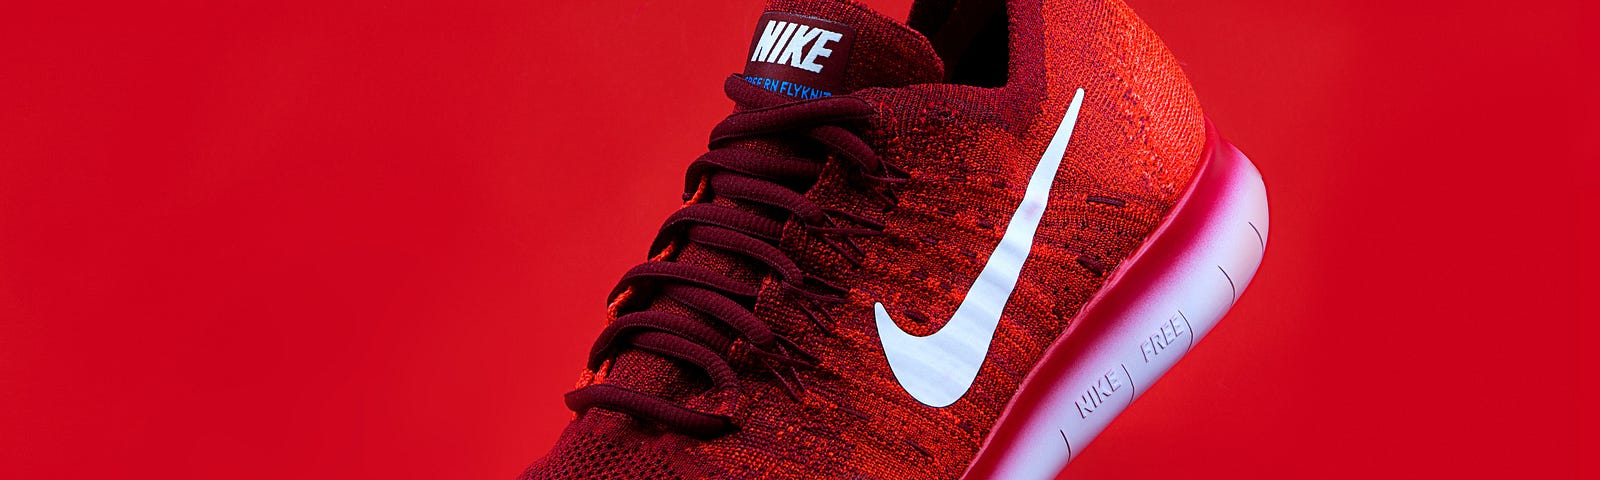 Red and white Nike shoe